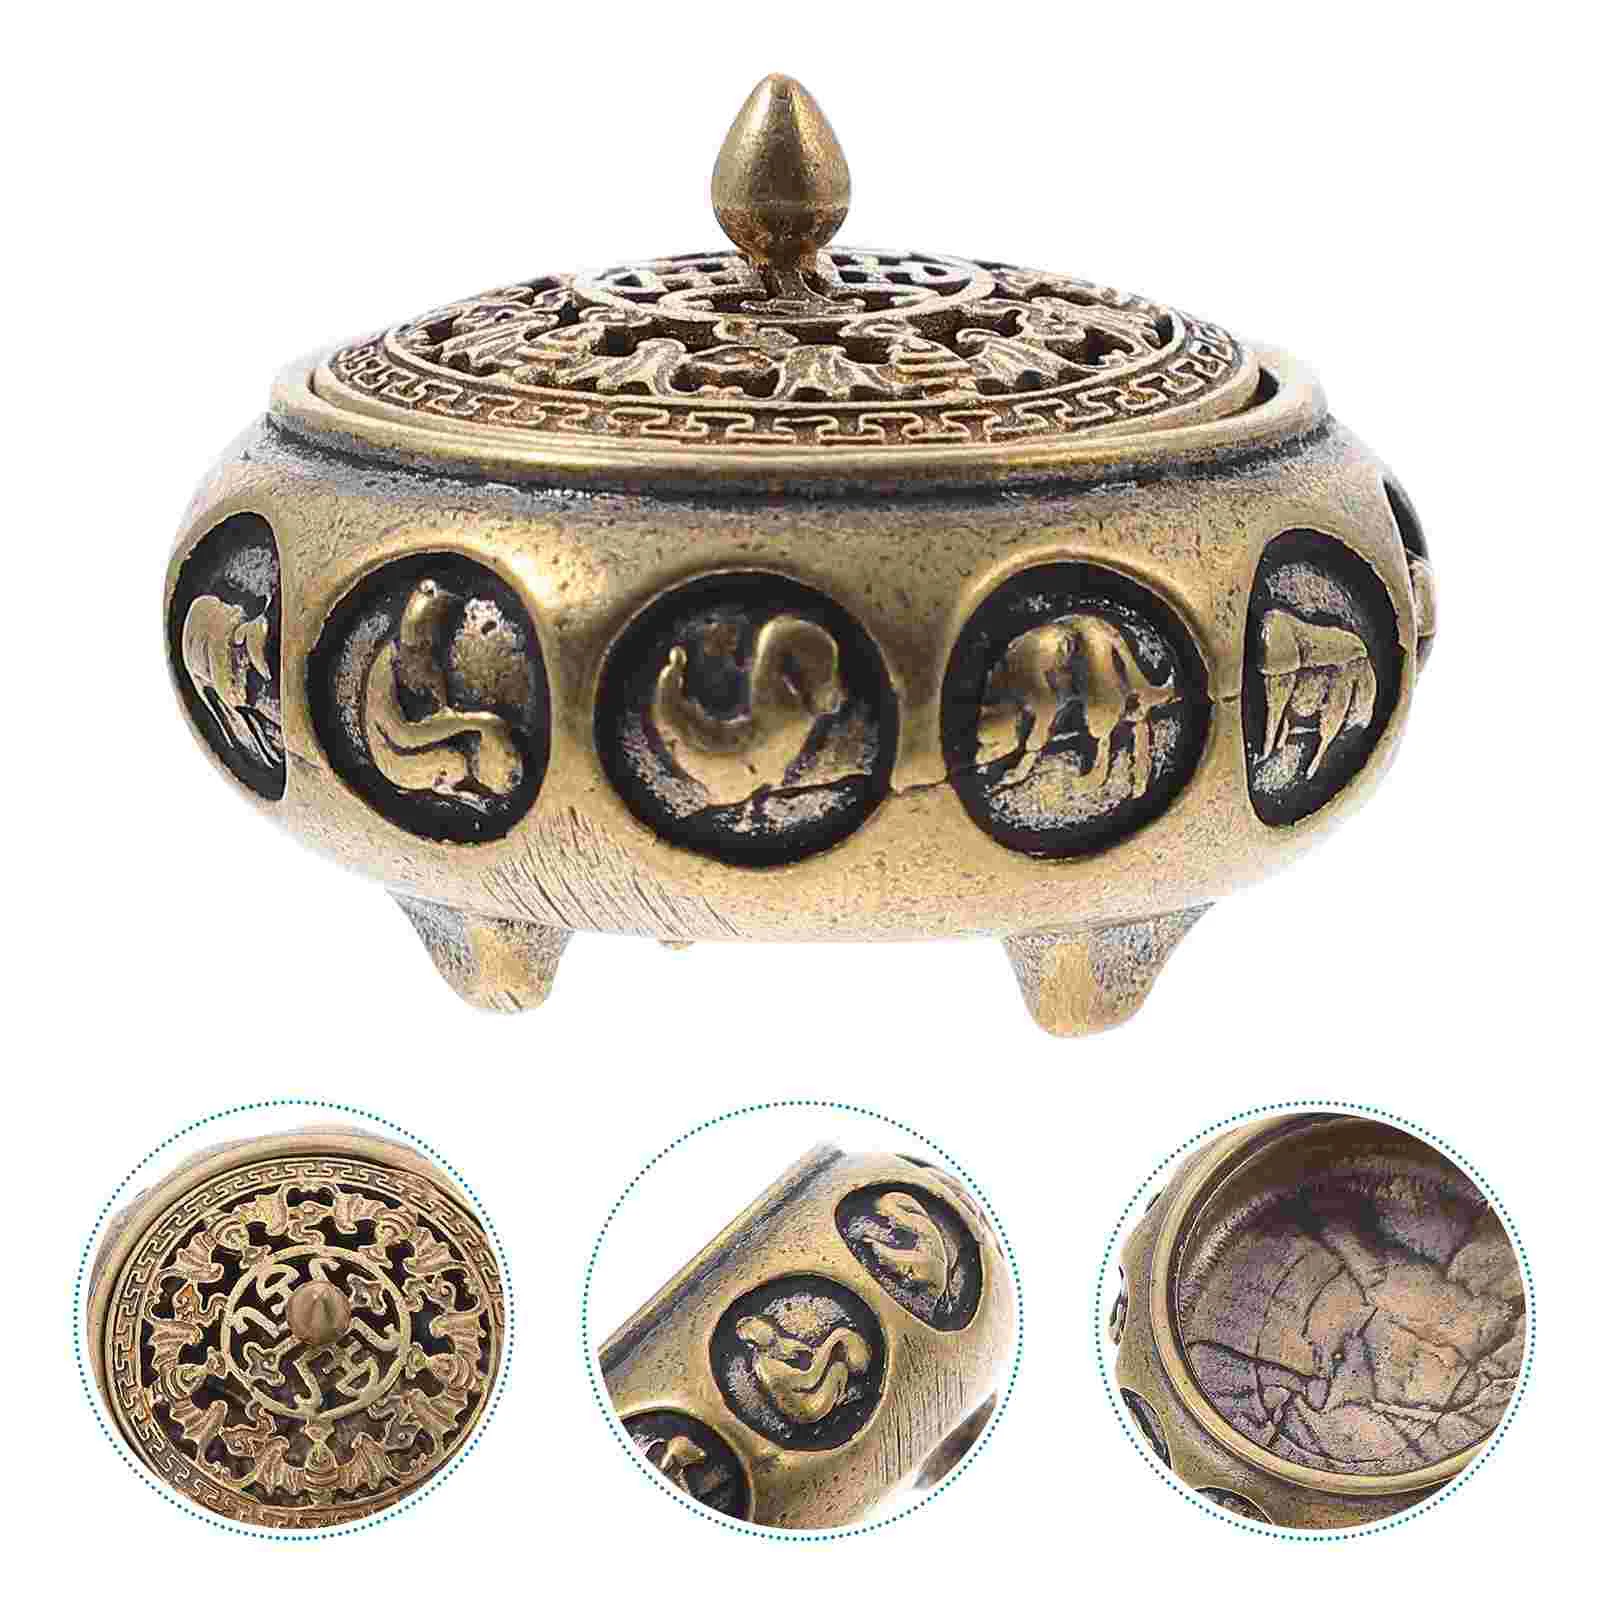 

Burner Chinese Censer Metal Holder Ash Tray Container Aromatherapy Ornamentvintage Furnace Handicraft